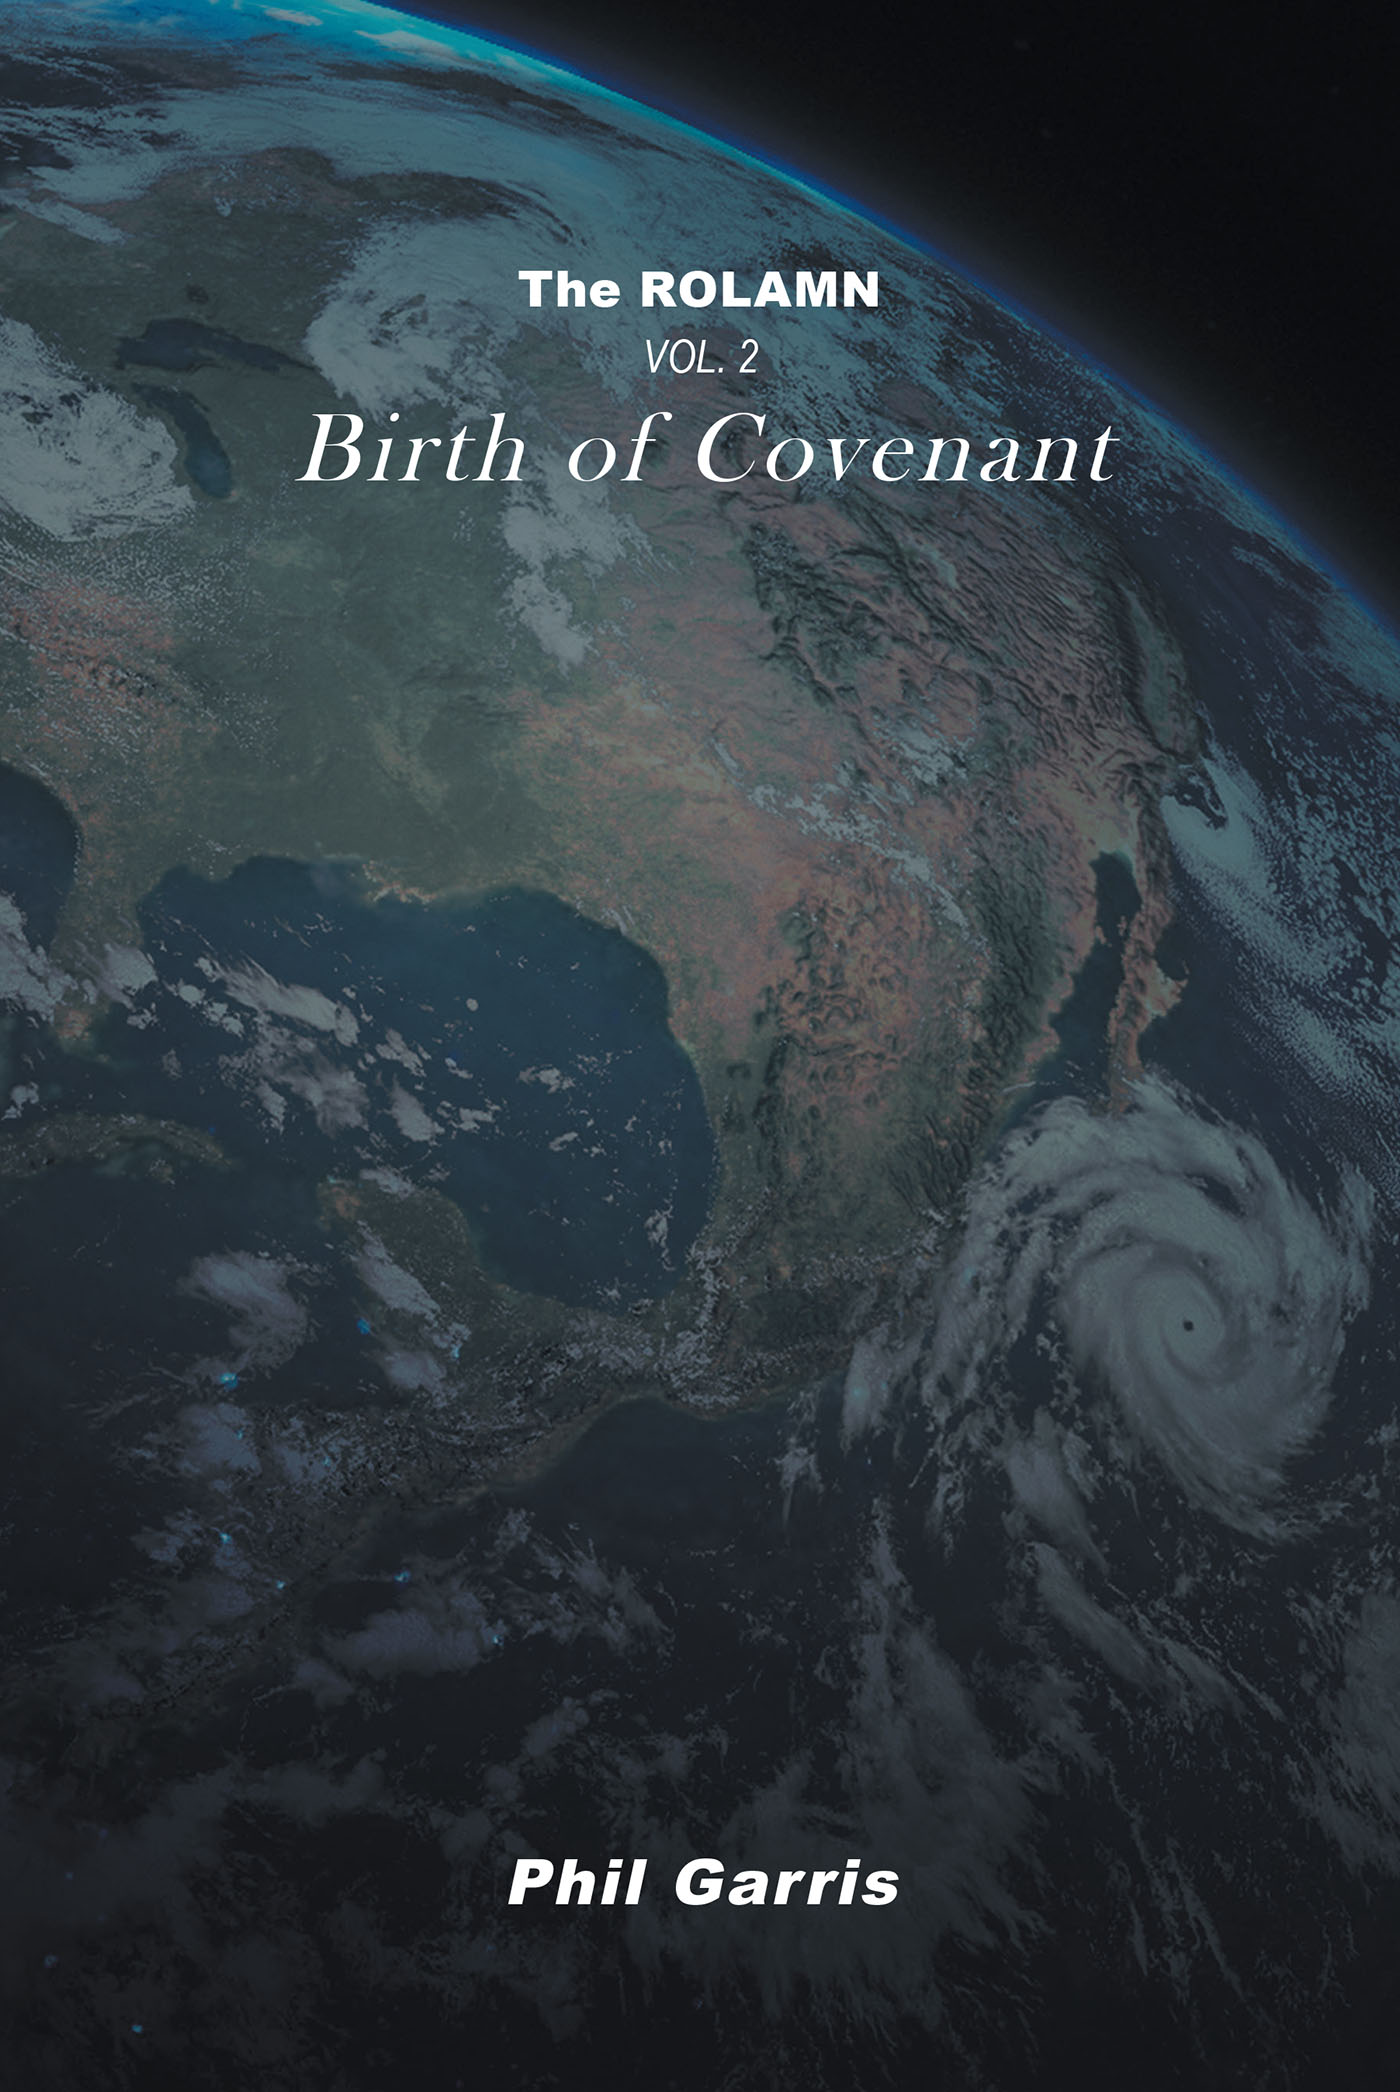 Author Phil Garris’s 2nd Book, “The ROLAMN: vol.2 – Birth of Covenant,” is a Compelling Work That Explains the Spiritual Revelations the Author Has Personally Experienced